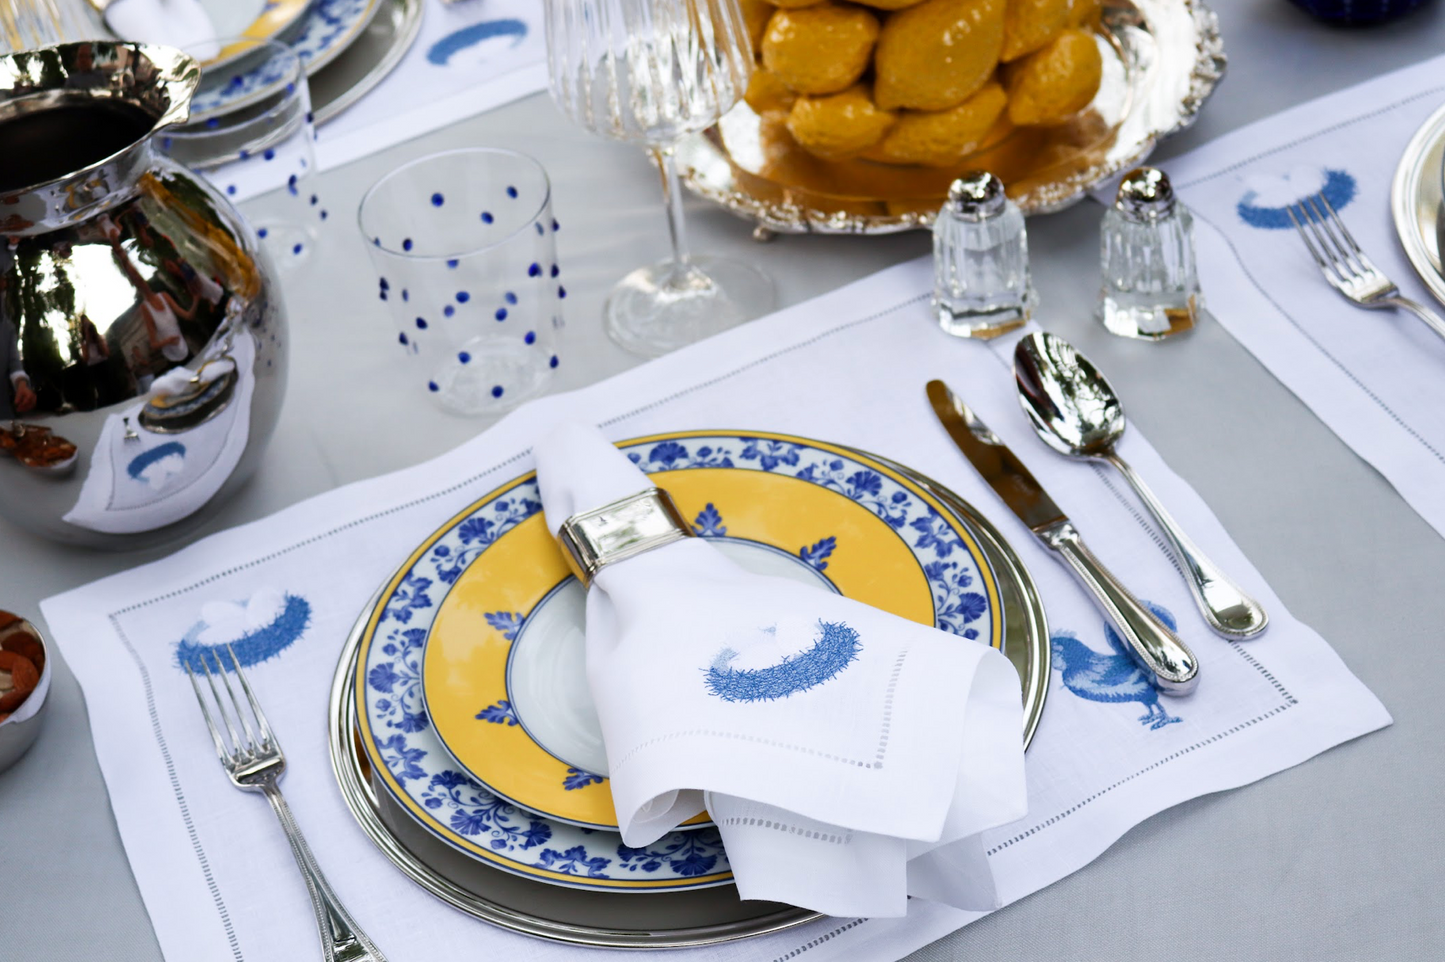 Hen and egg placemats and napkins, set of 4